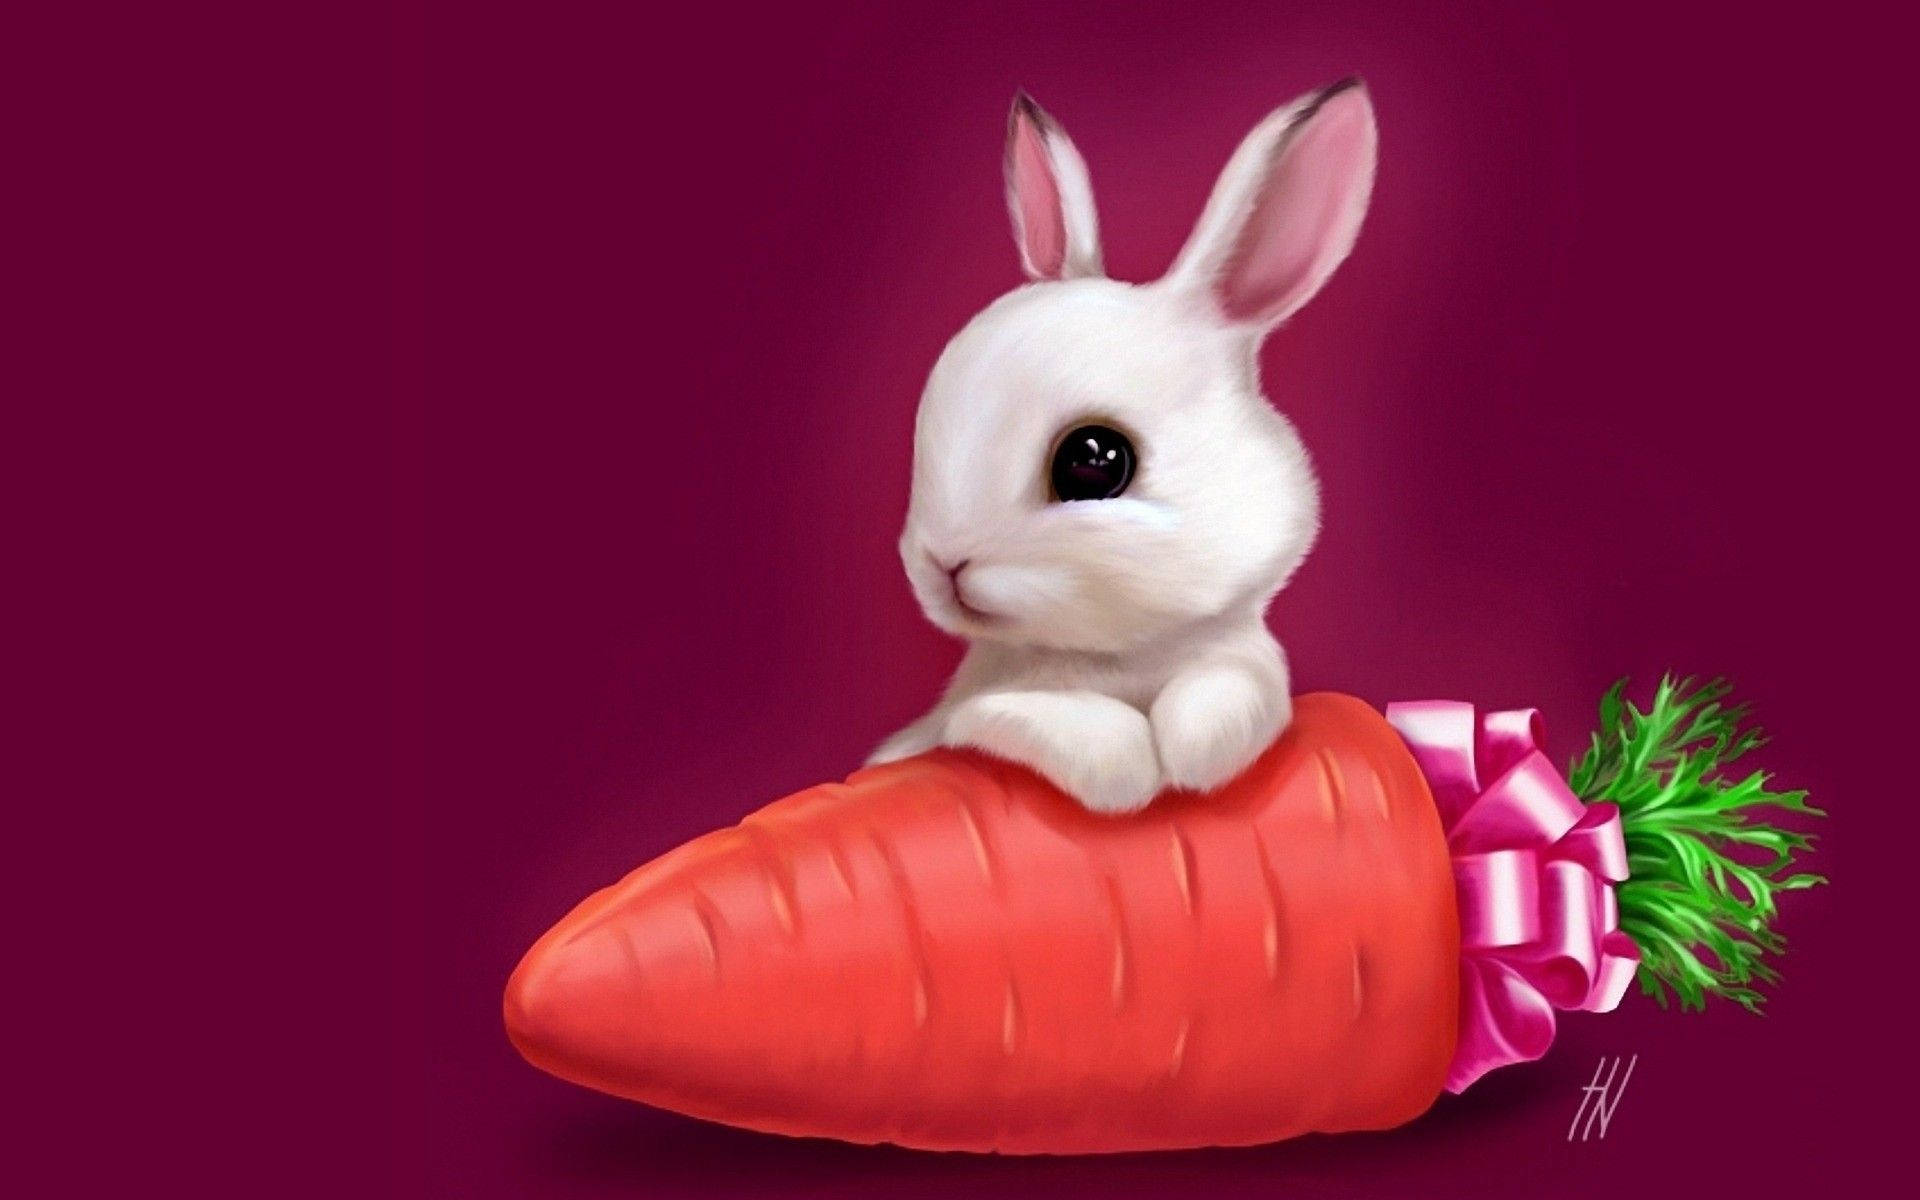 Cute Easter Bunny On Carrot Wallpaper